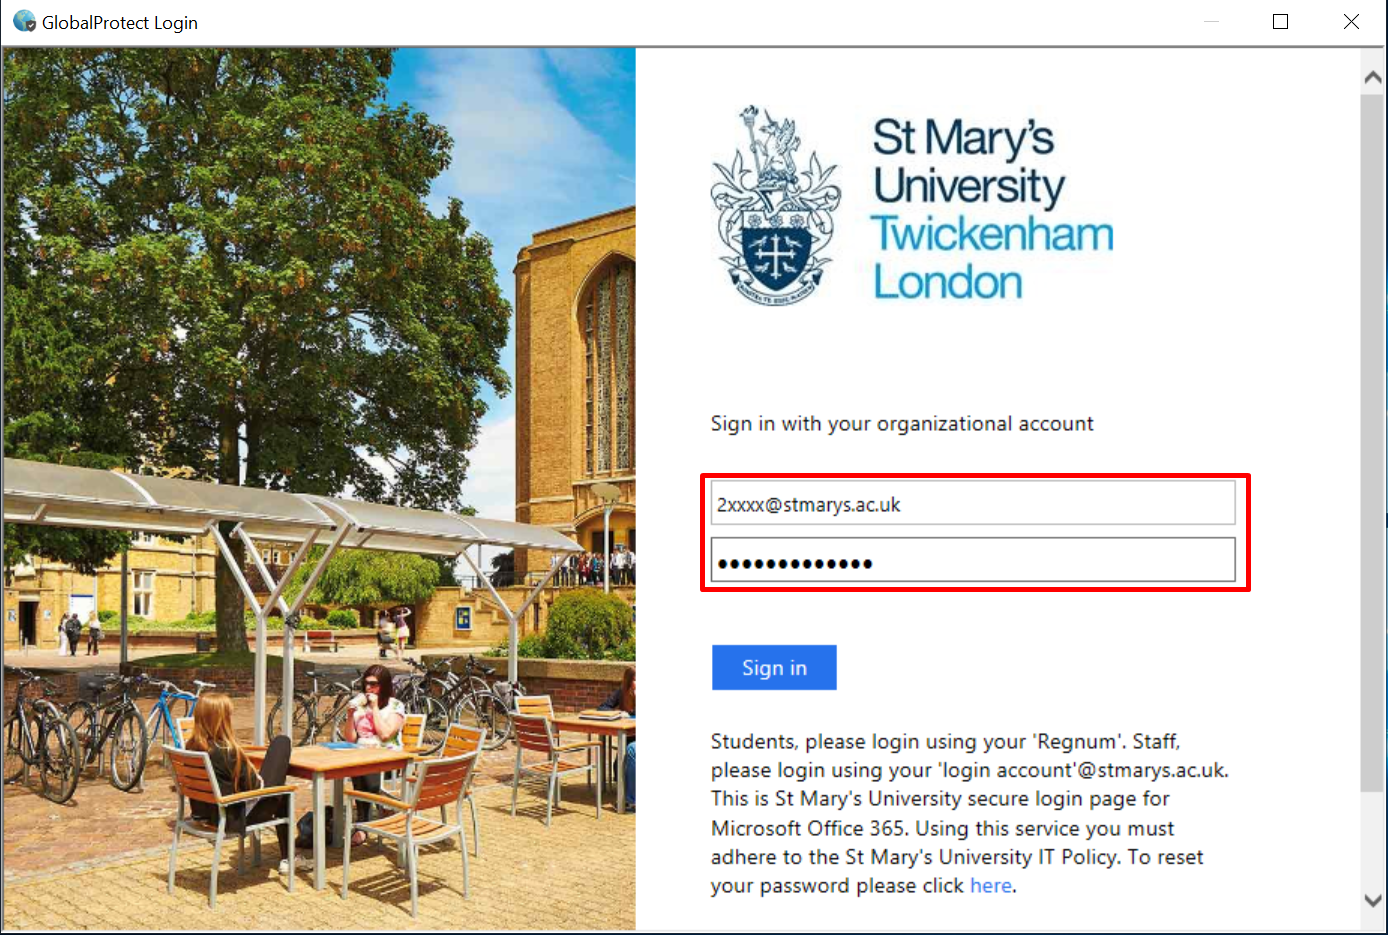 A red box around the login area of the St Marys page where you input your username@stmarys.ac.uk and password